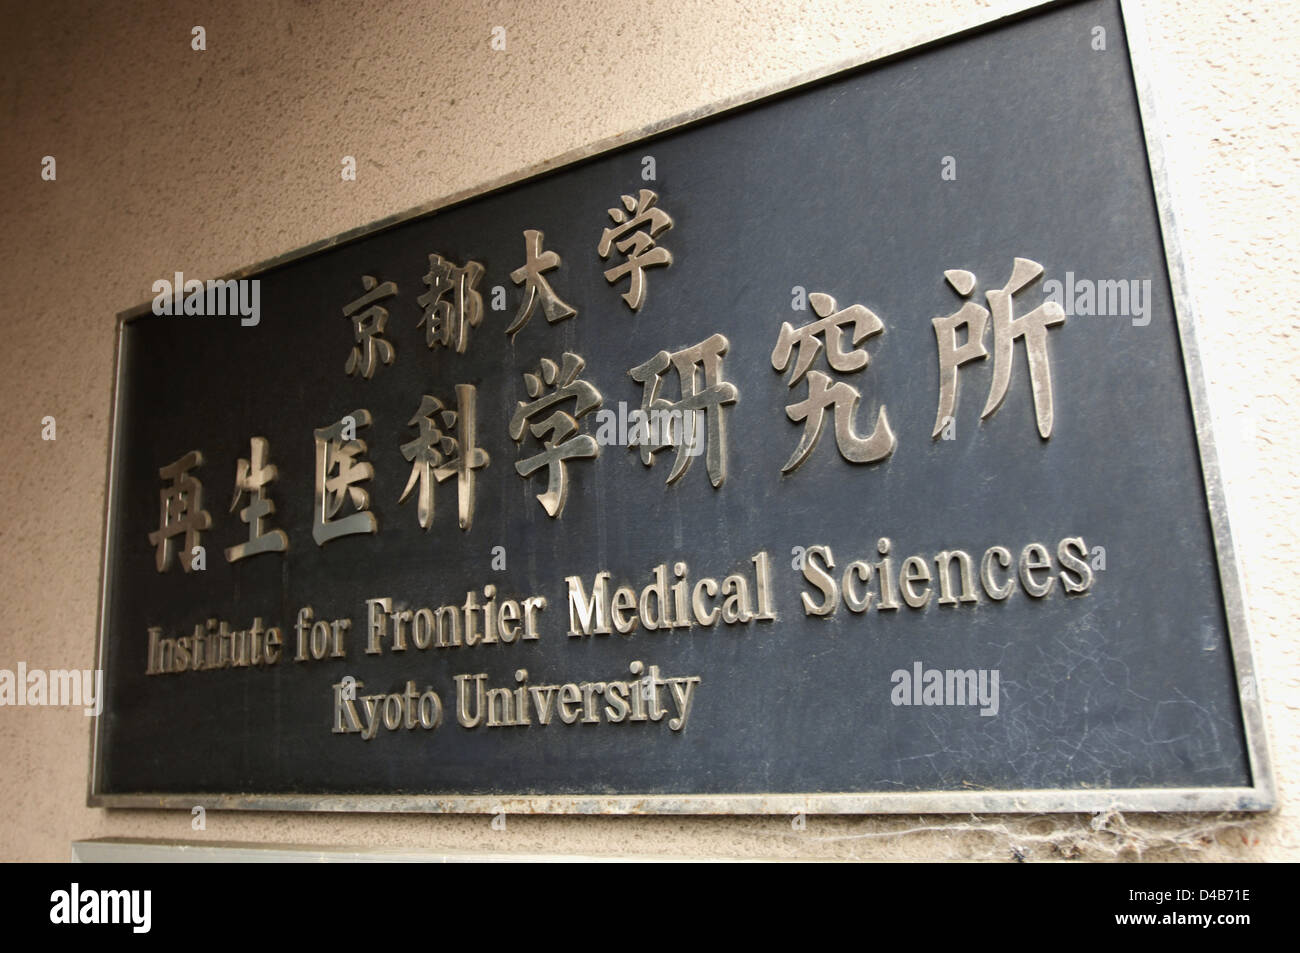 Japan, Kyoto University, wall sign for The Institute of Frontier Medical Sciences Stock Photo